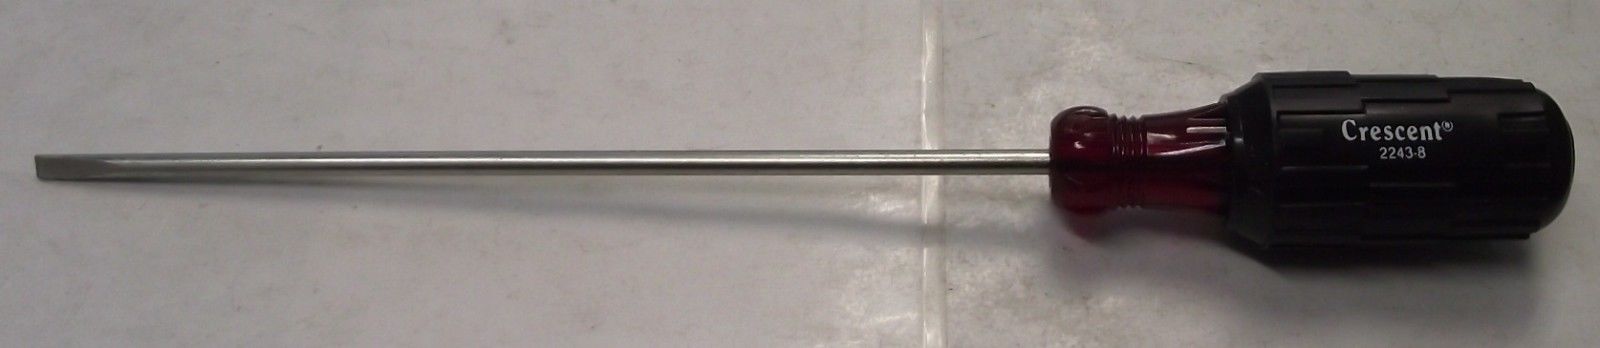 Crescent 22438 Electrician Slotted Screwdriver Round Shaft 3/16" x 8" USA